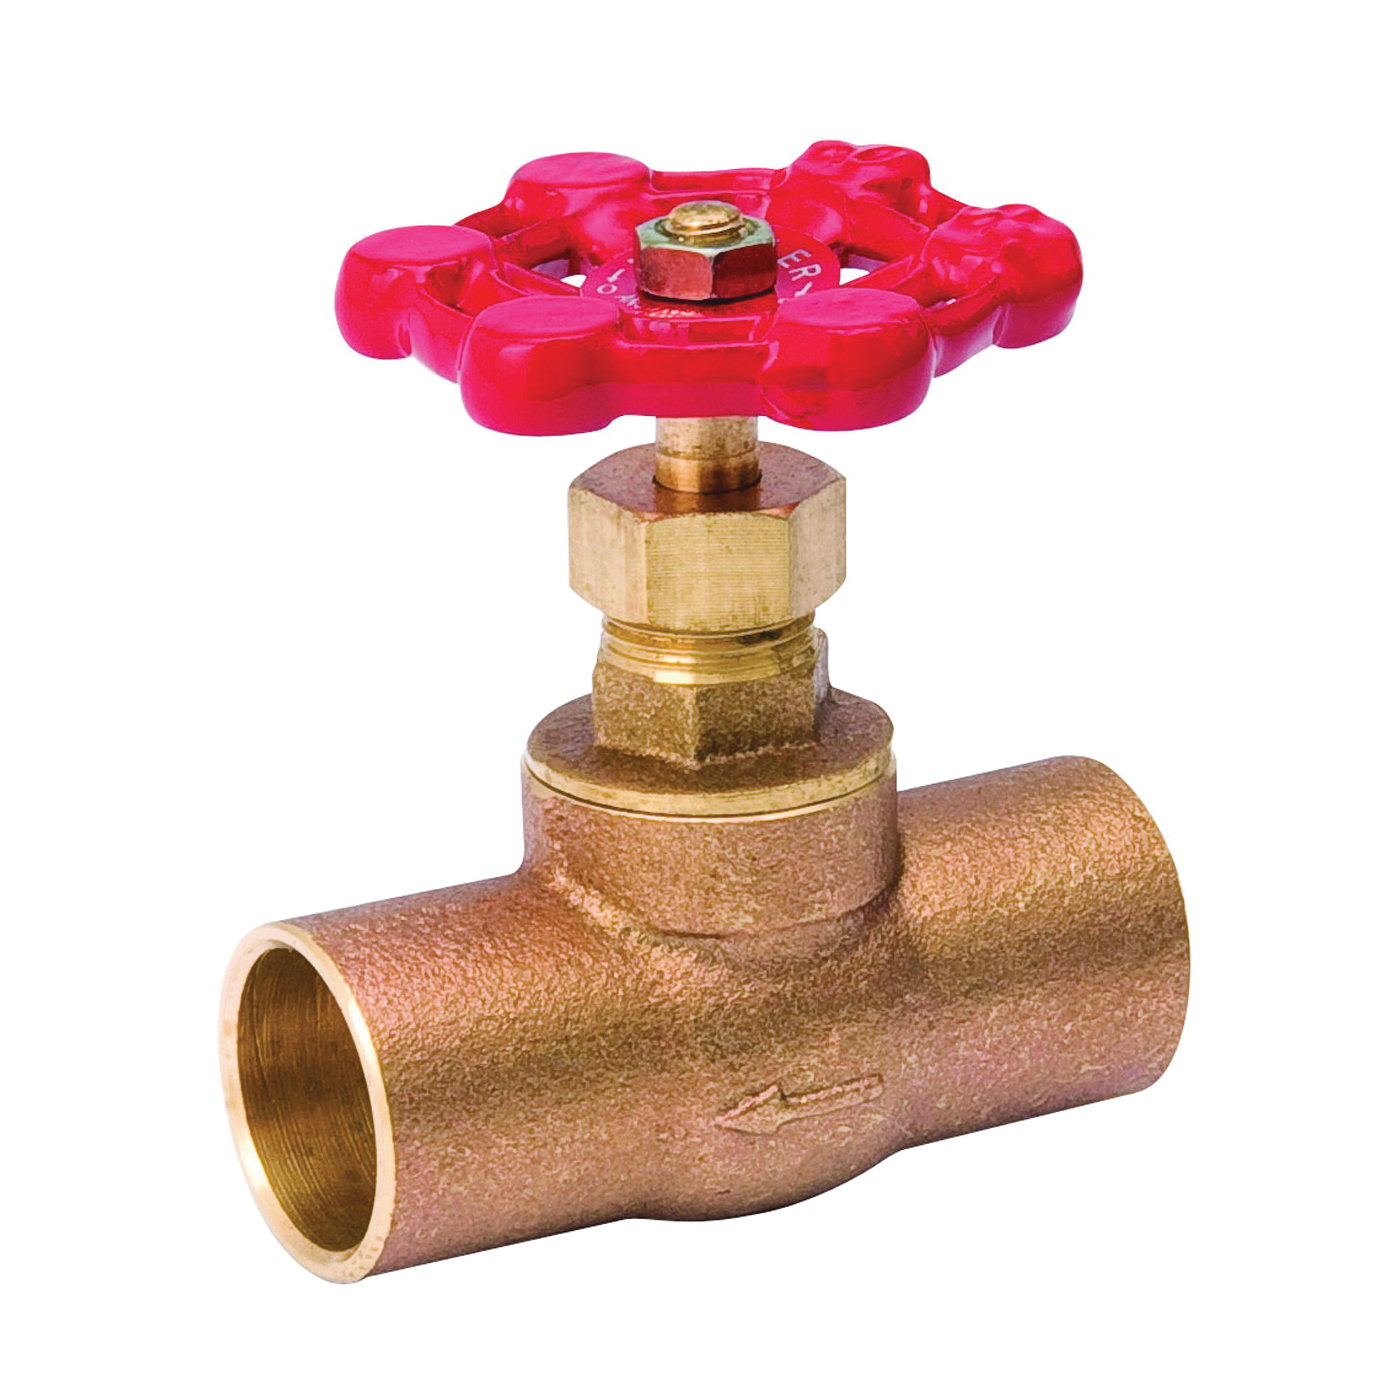 105-503NL Stop Valve, 1/2 in Connection, Compression, 125 psi Pressure, Brass Body